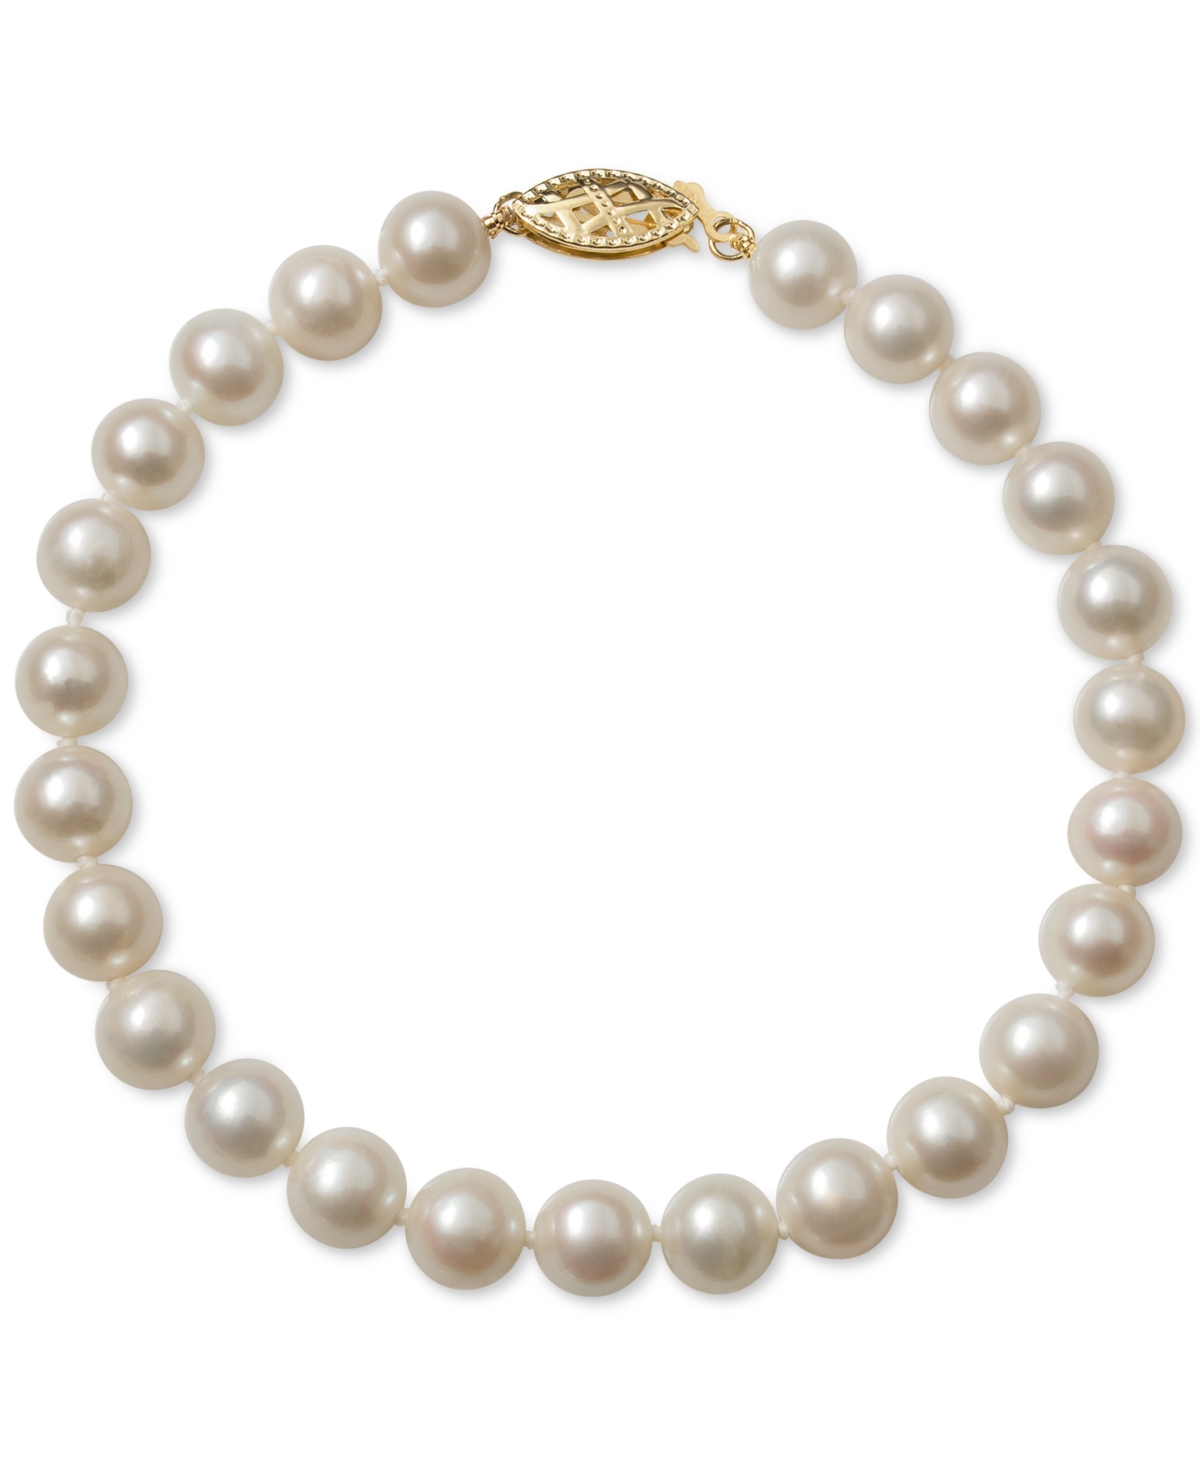 Cultured Freshwater Pearl Bracelet (6mm) in 14k Gold - Yellow Gold